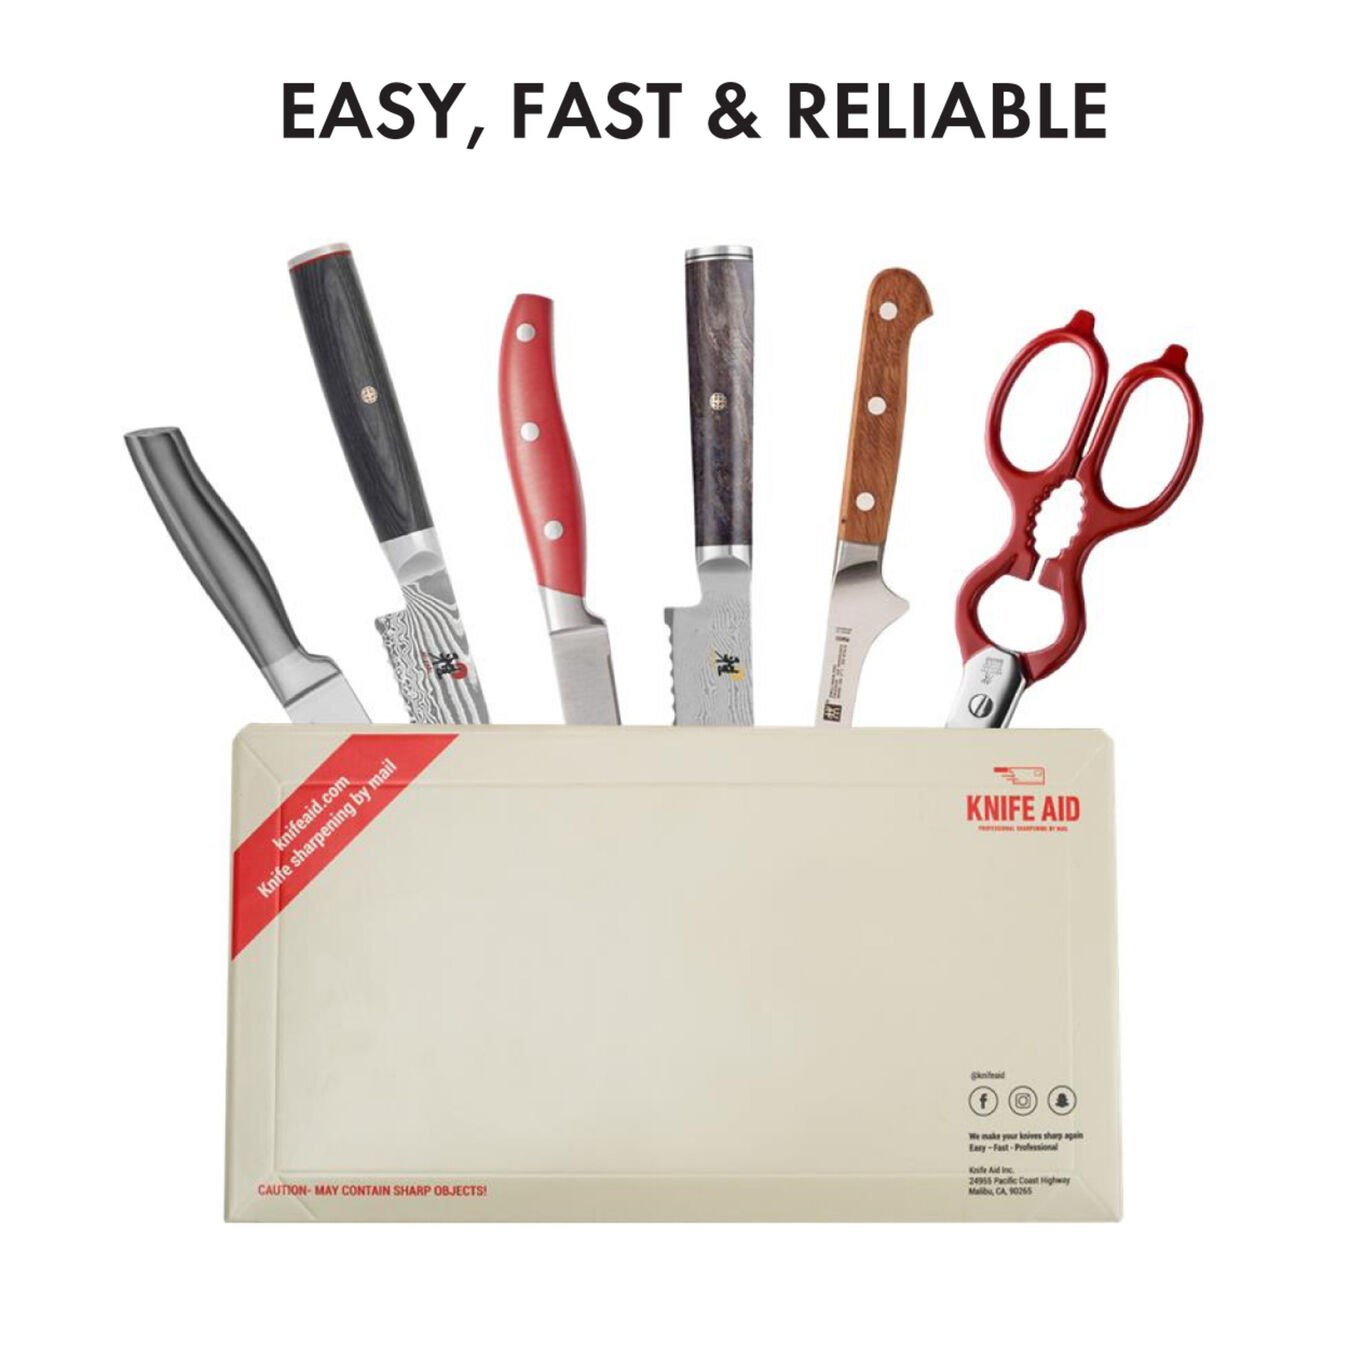 Knife Aid Professional Knife Sharpening by Mail, 7 knives,,large 3